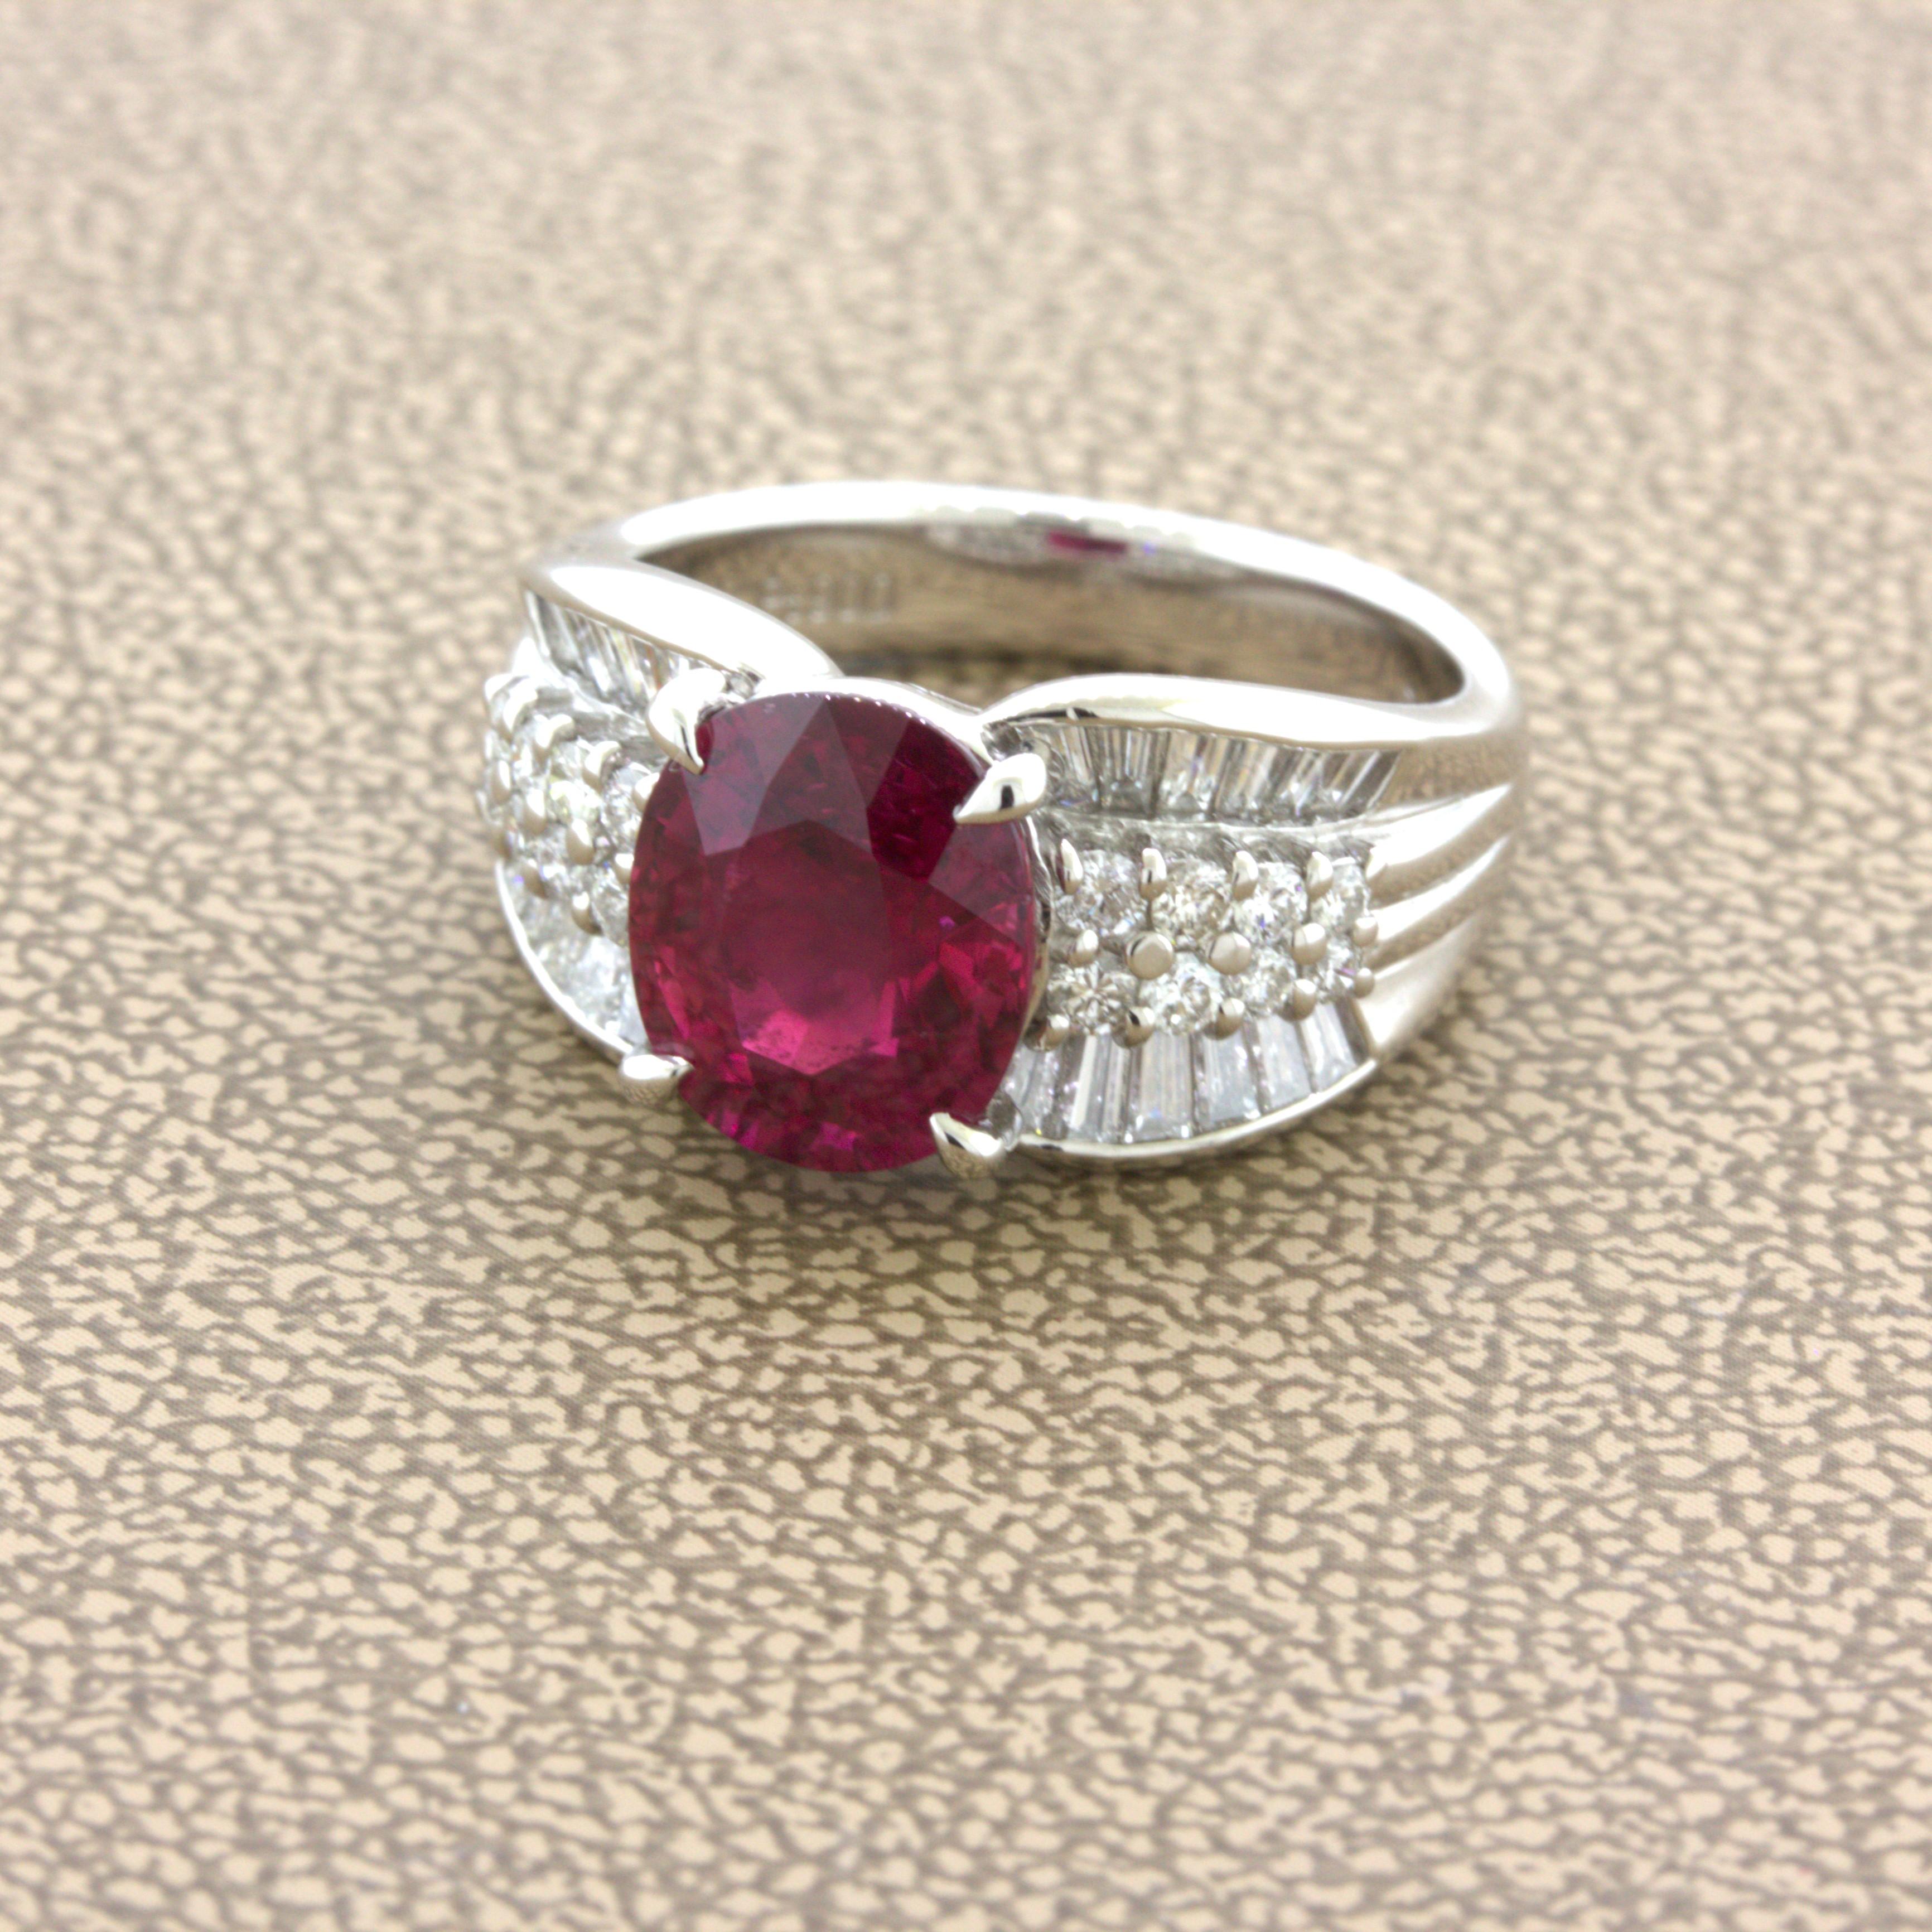 Oval Cut 4.05 Carat Ruby Diamond Platinum Ring, GIA Certified For Sale